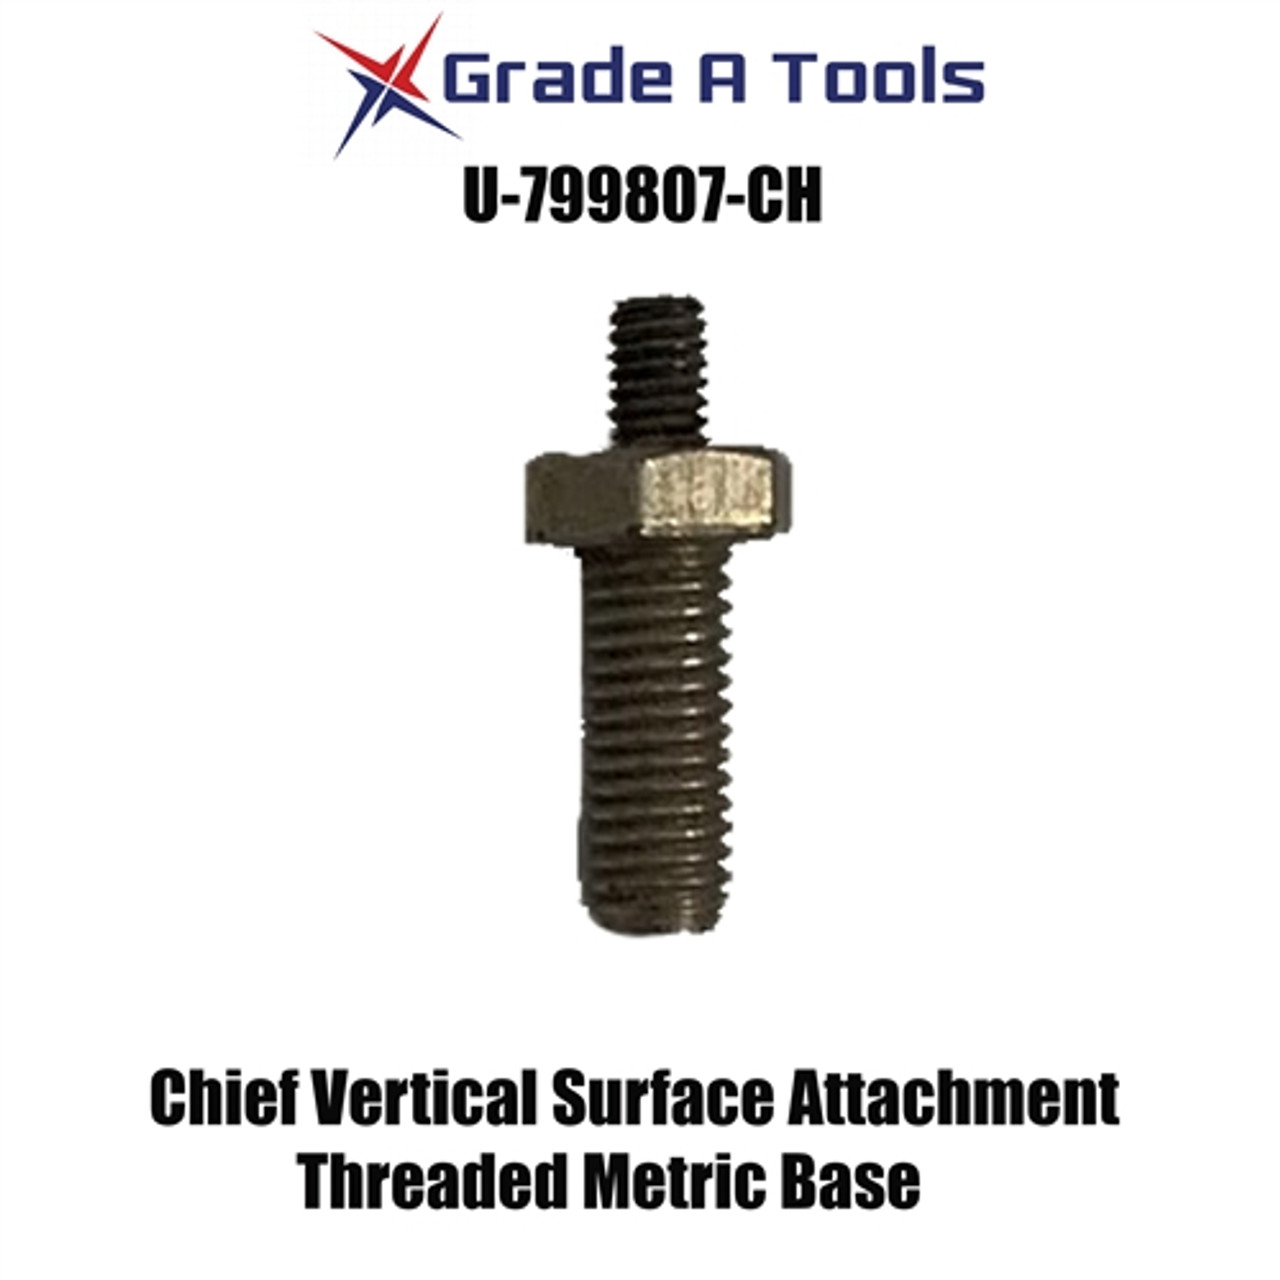 Chief Vertical Surface Attachment - Threaded Base Metric M6 - Used 799807